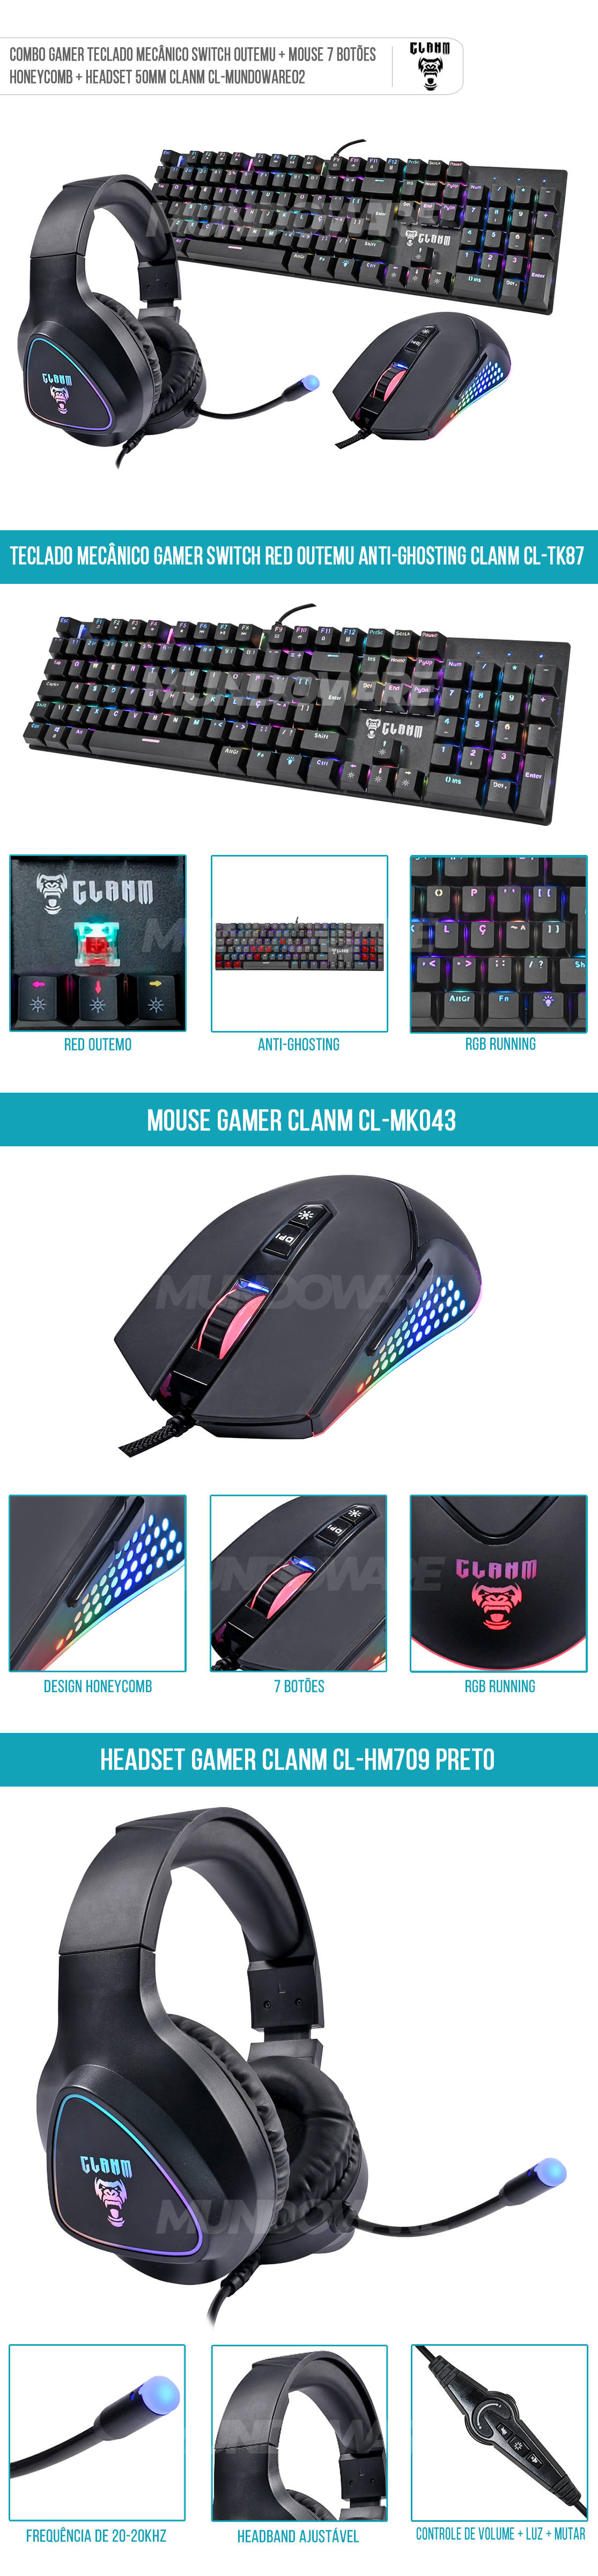 Combo Gamer Teclado Mecânico Switch Red Outemu + Mouse Colméia 7 Botões + Headset Stereo Clanm CL-Mundoware02